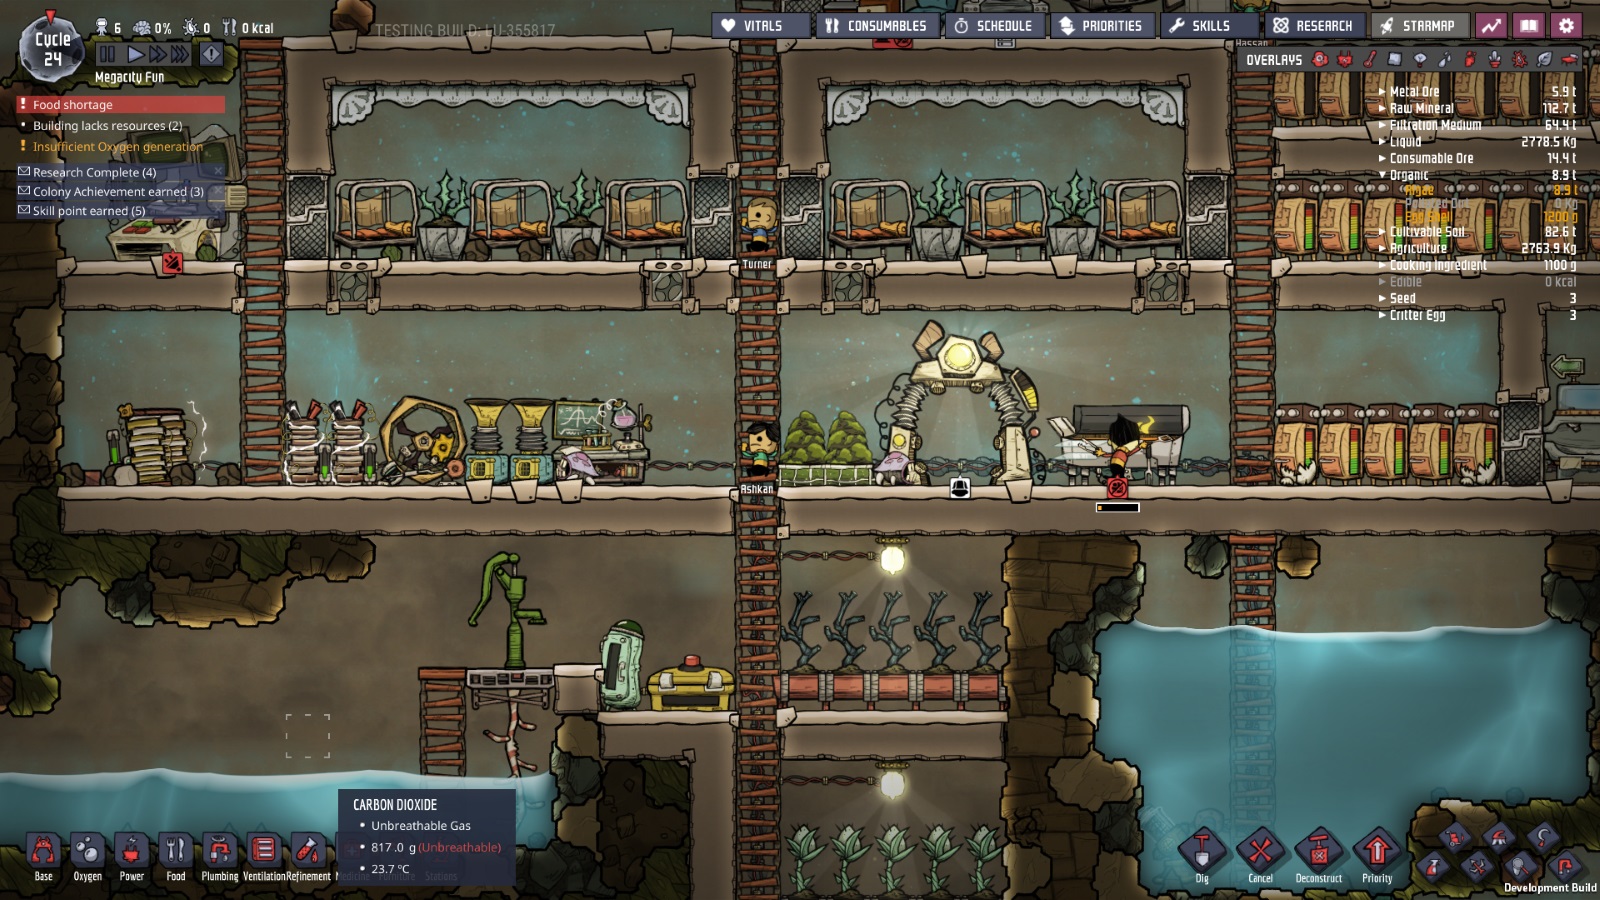 oxygen not included pt br